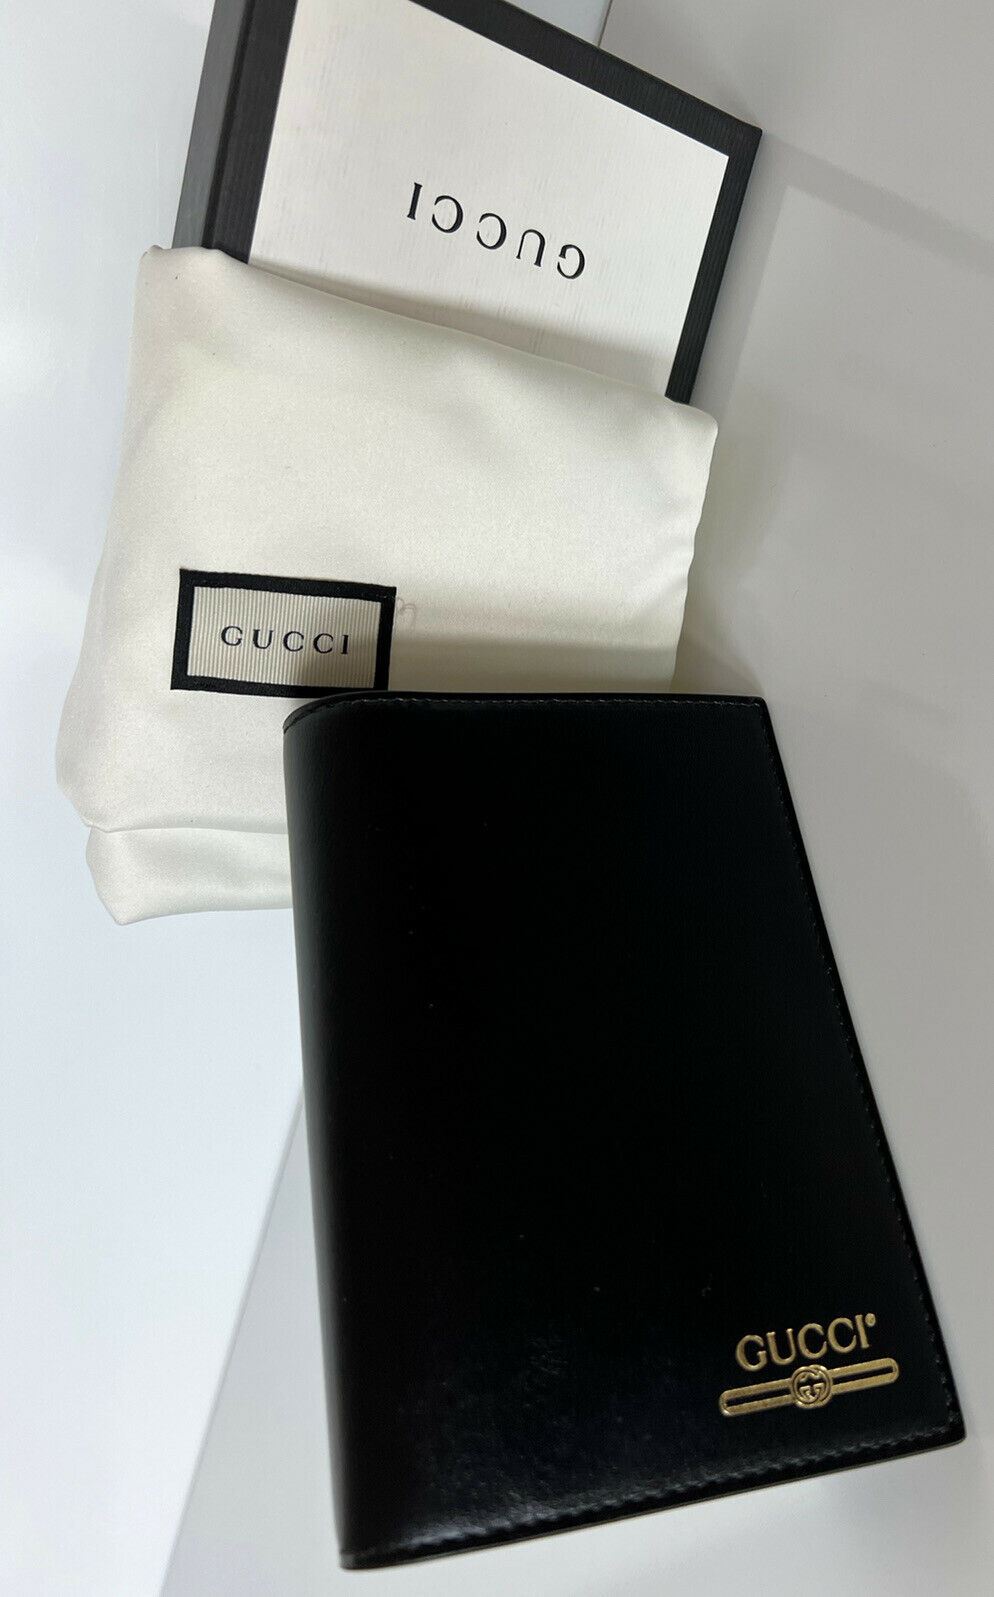 NWT Gucci GG Web Bifold Passport Holder Wallet Black Made in Italy 547608